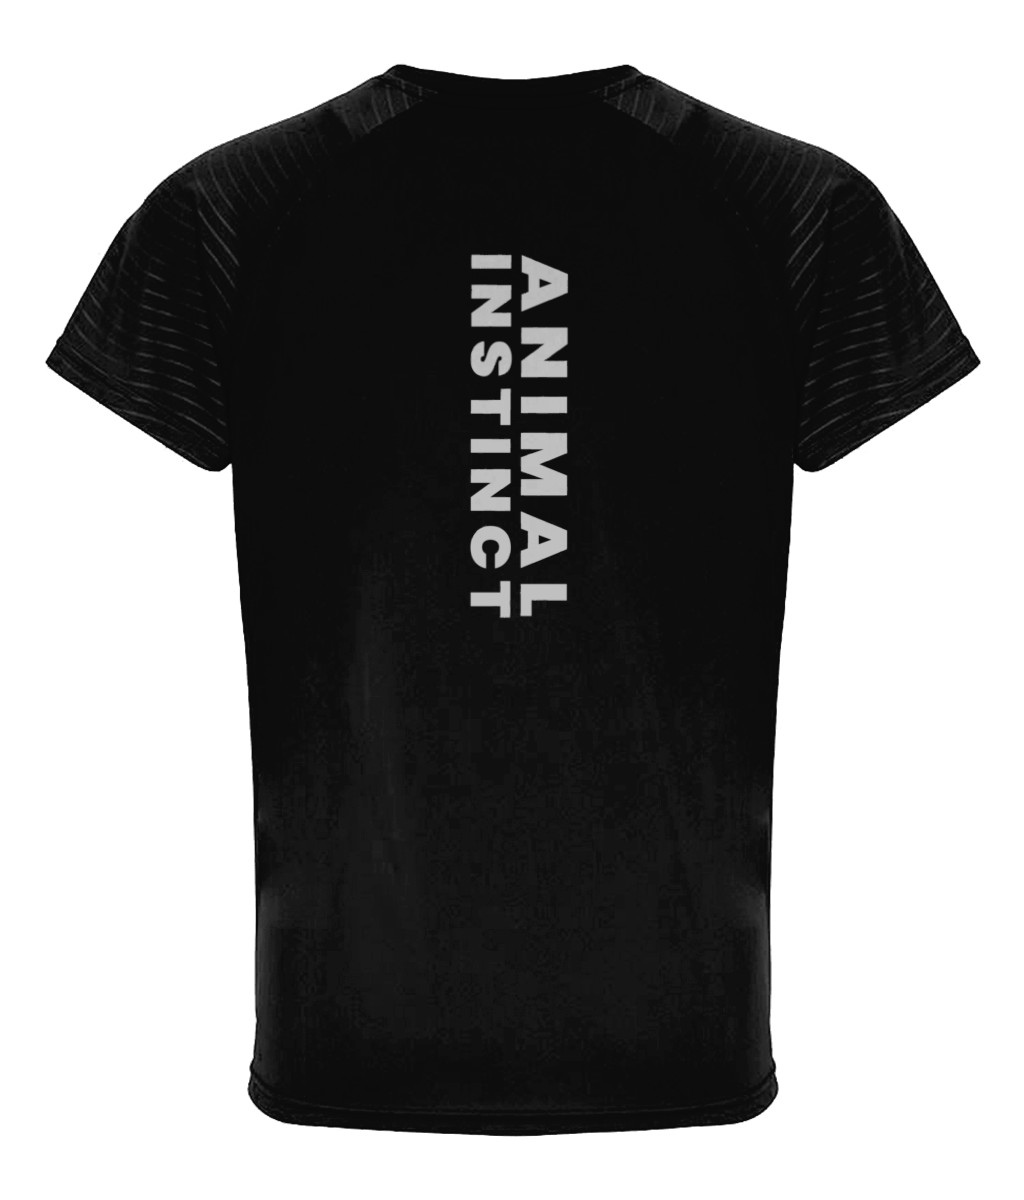 Mens black Embossed Sleeve Premium T-Shirt with Animal Instinct written in bold vertically down the spine on the back of the shirt